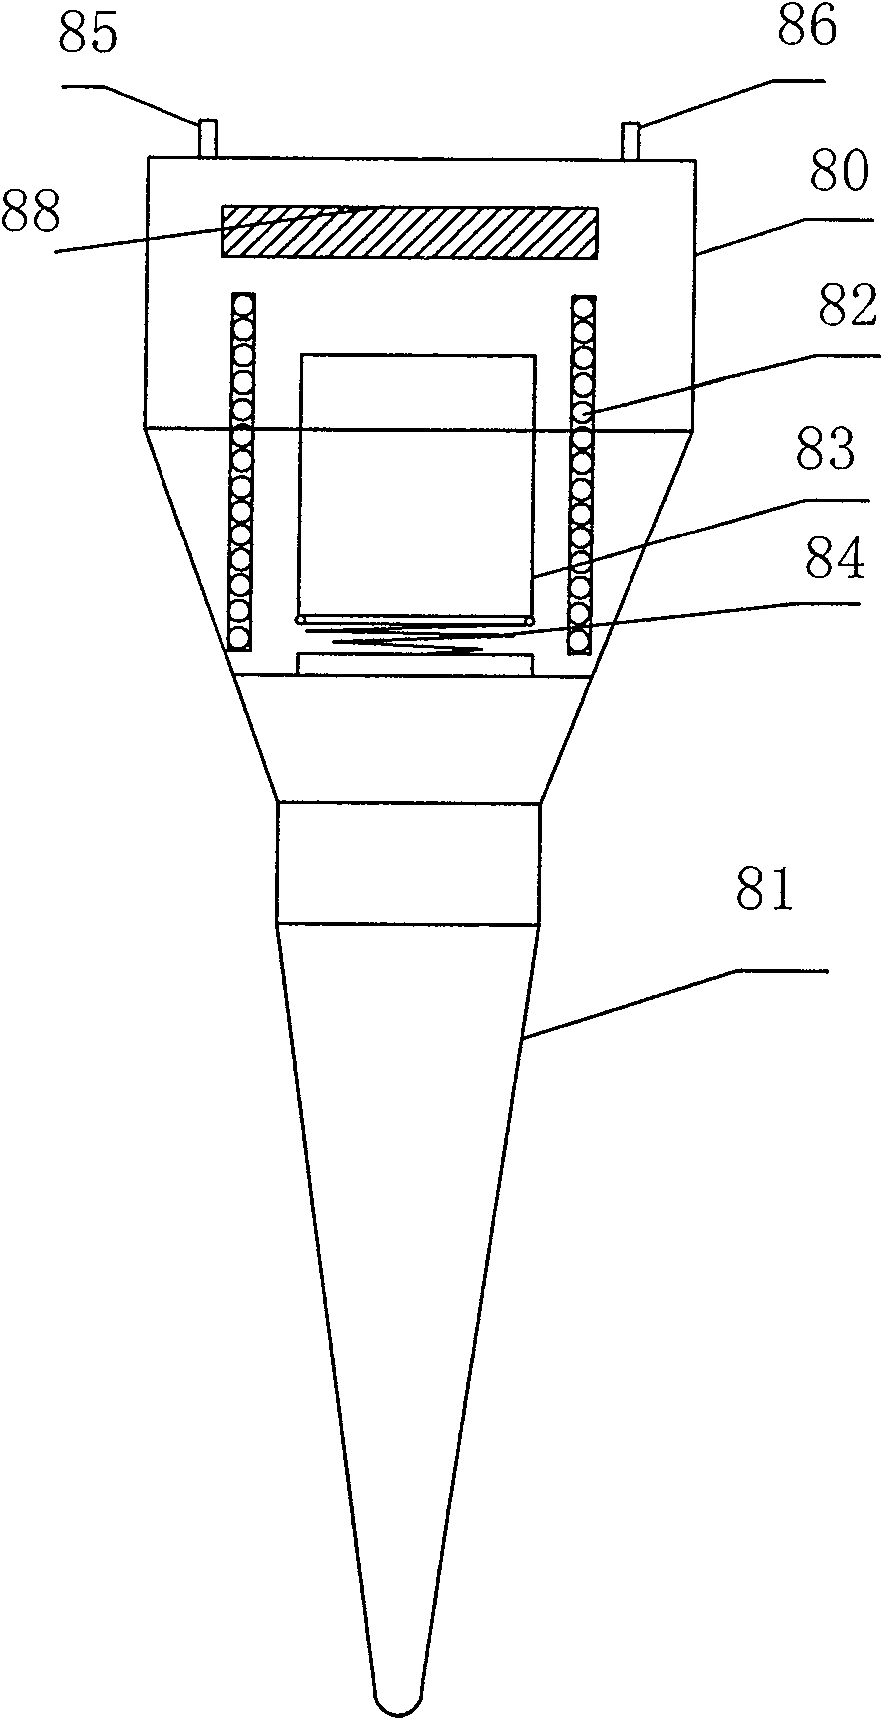 Seismic prospecting data collecting system